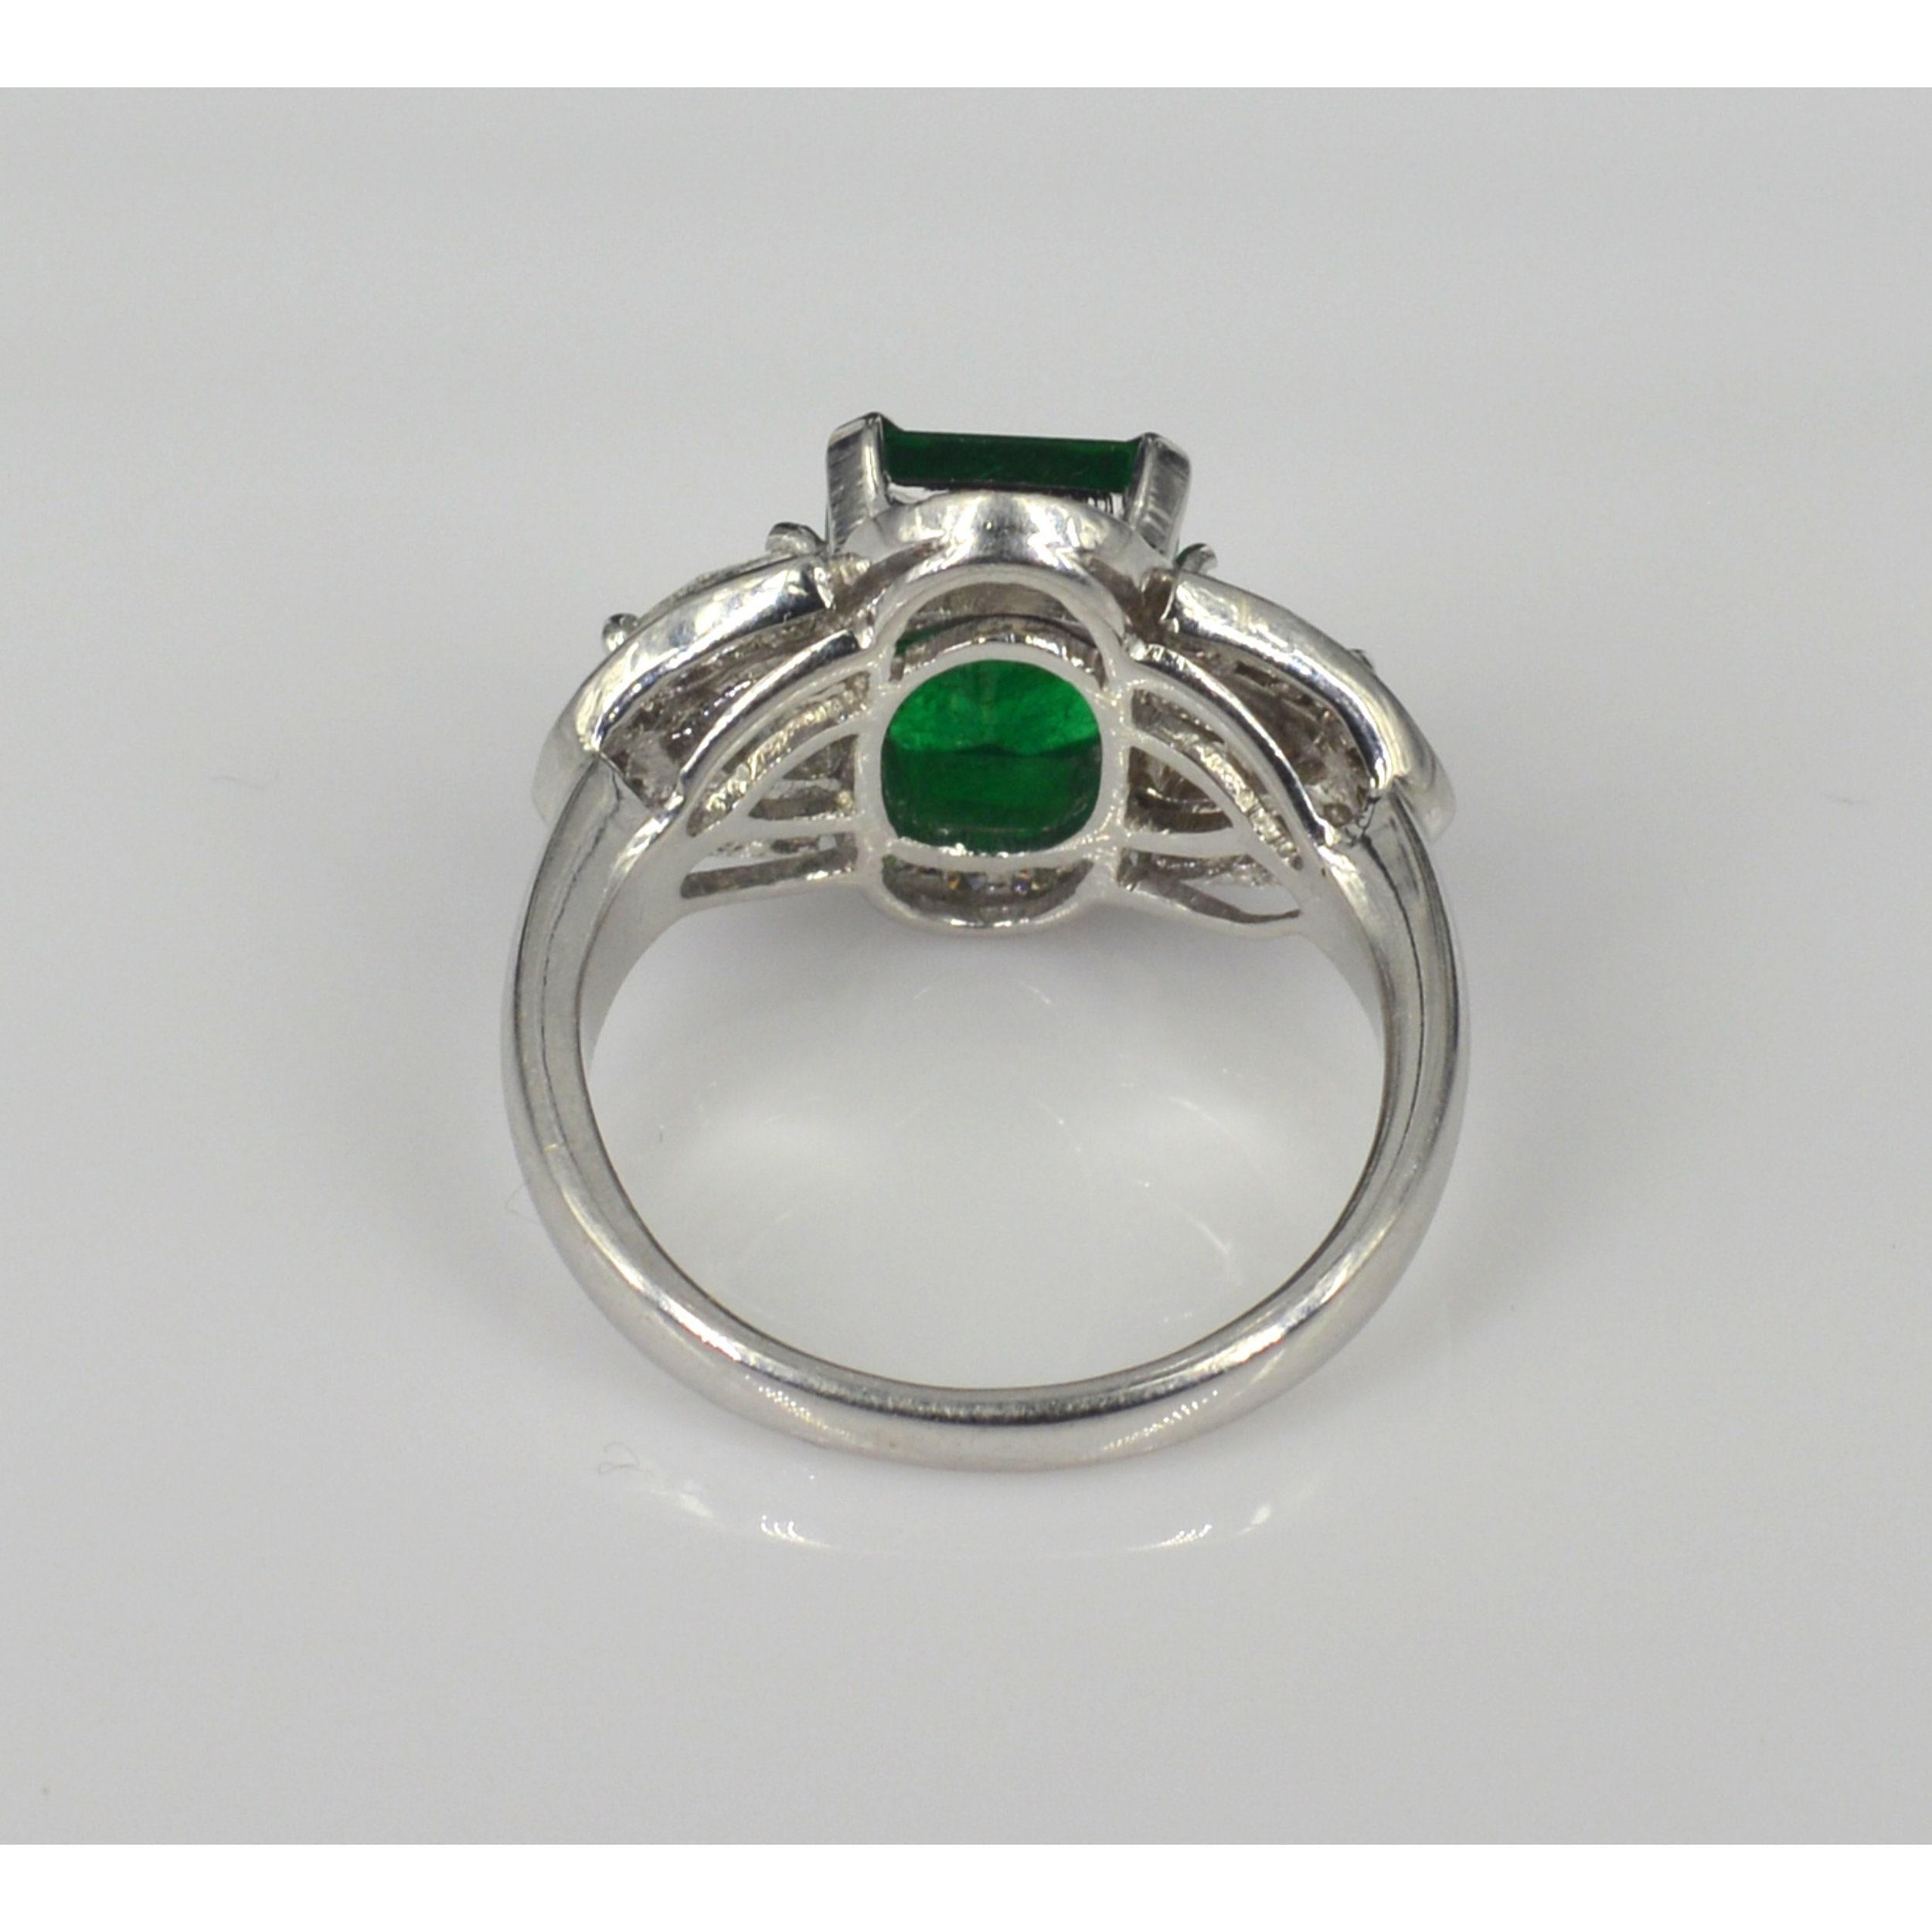 For Sale:  Antique 3 Carat Emerald Engagement Ring, Emerald Statement Ring 5